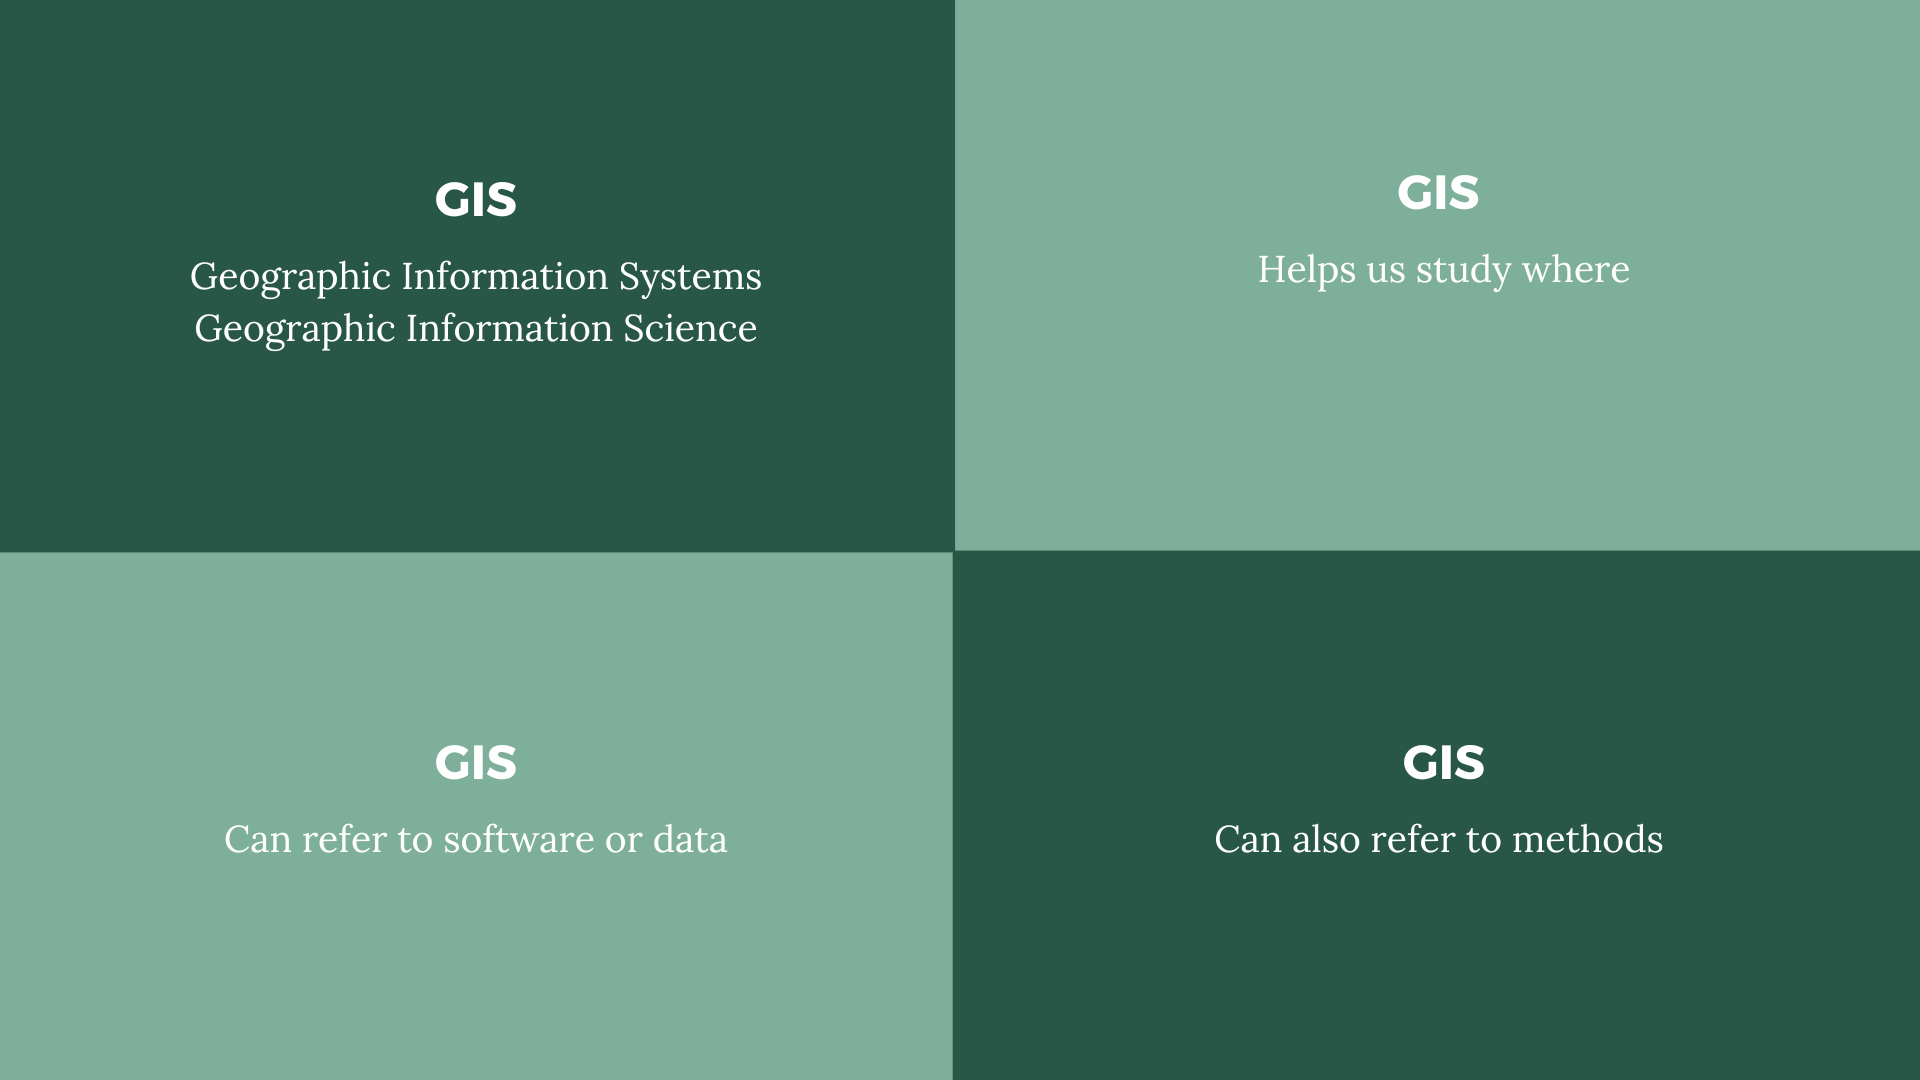 Screenshot of a slide defining GIS as Geographic Information Science or Systems, and discussing how it can be methods, data, or tools